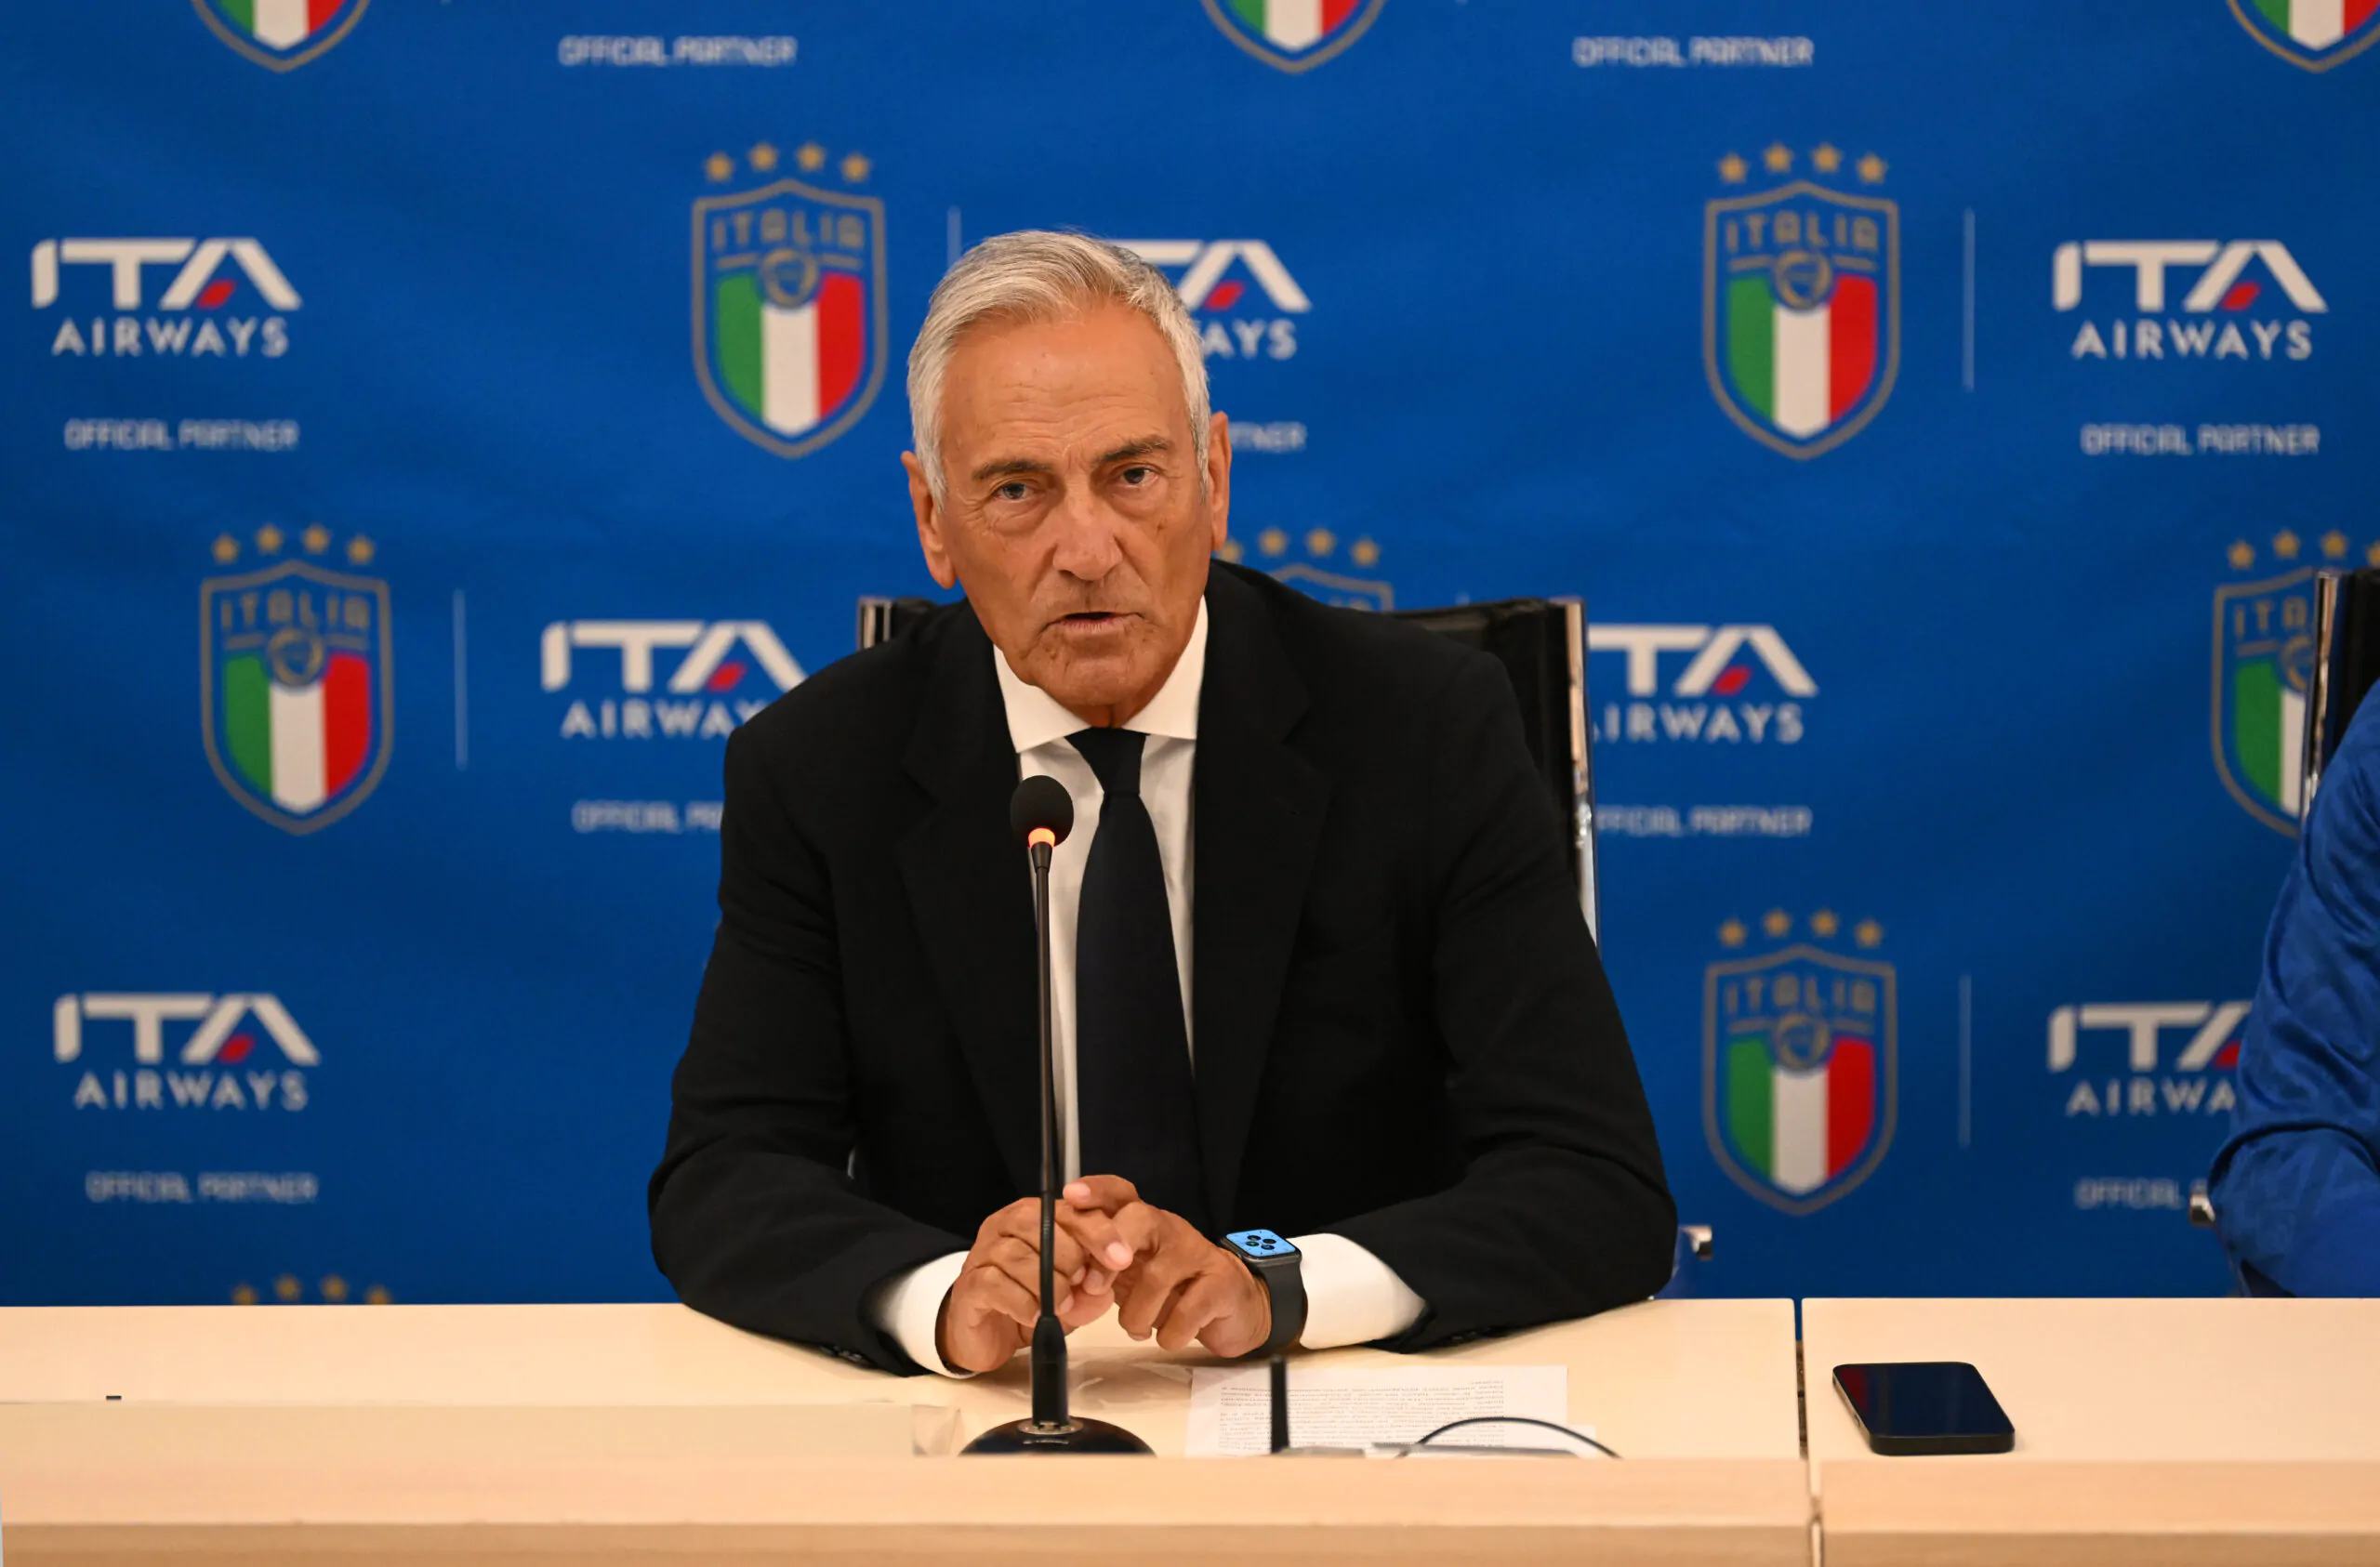 Italy was awarded the joint organization of the 2032 European Championship along with Turkey, but it had the chance to host the 2030 World Cup too.